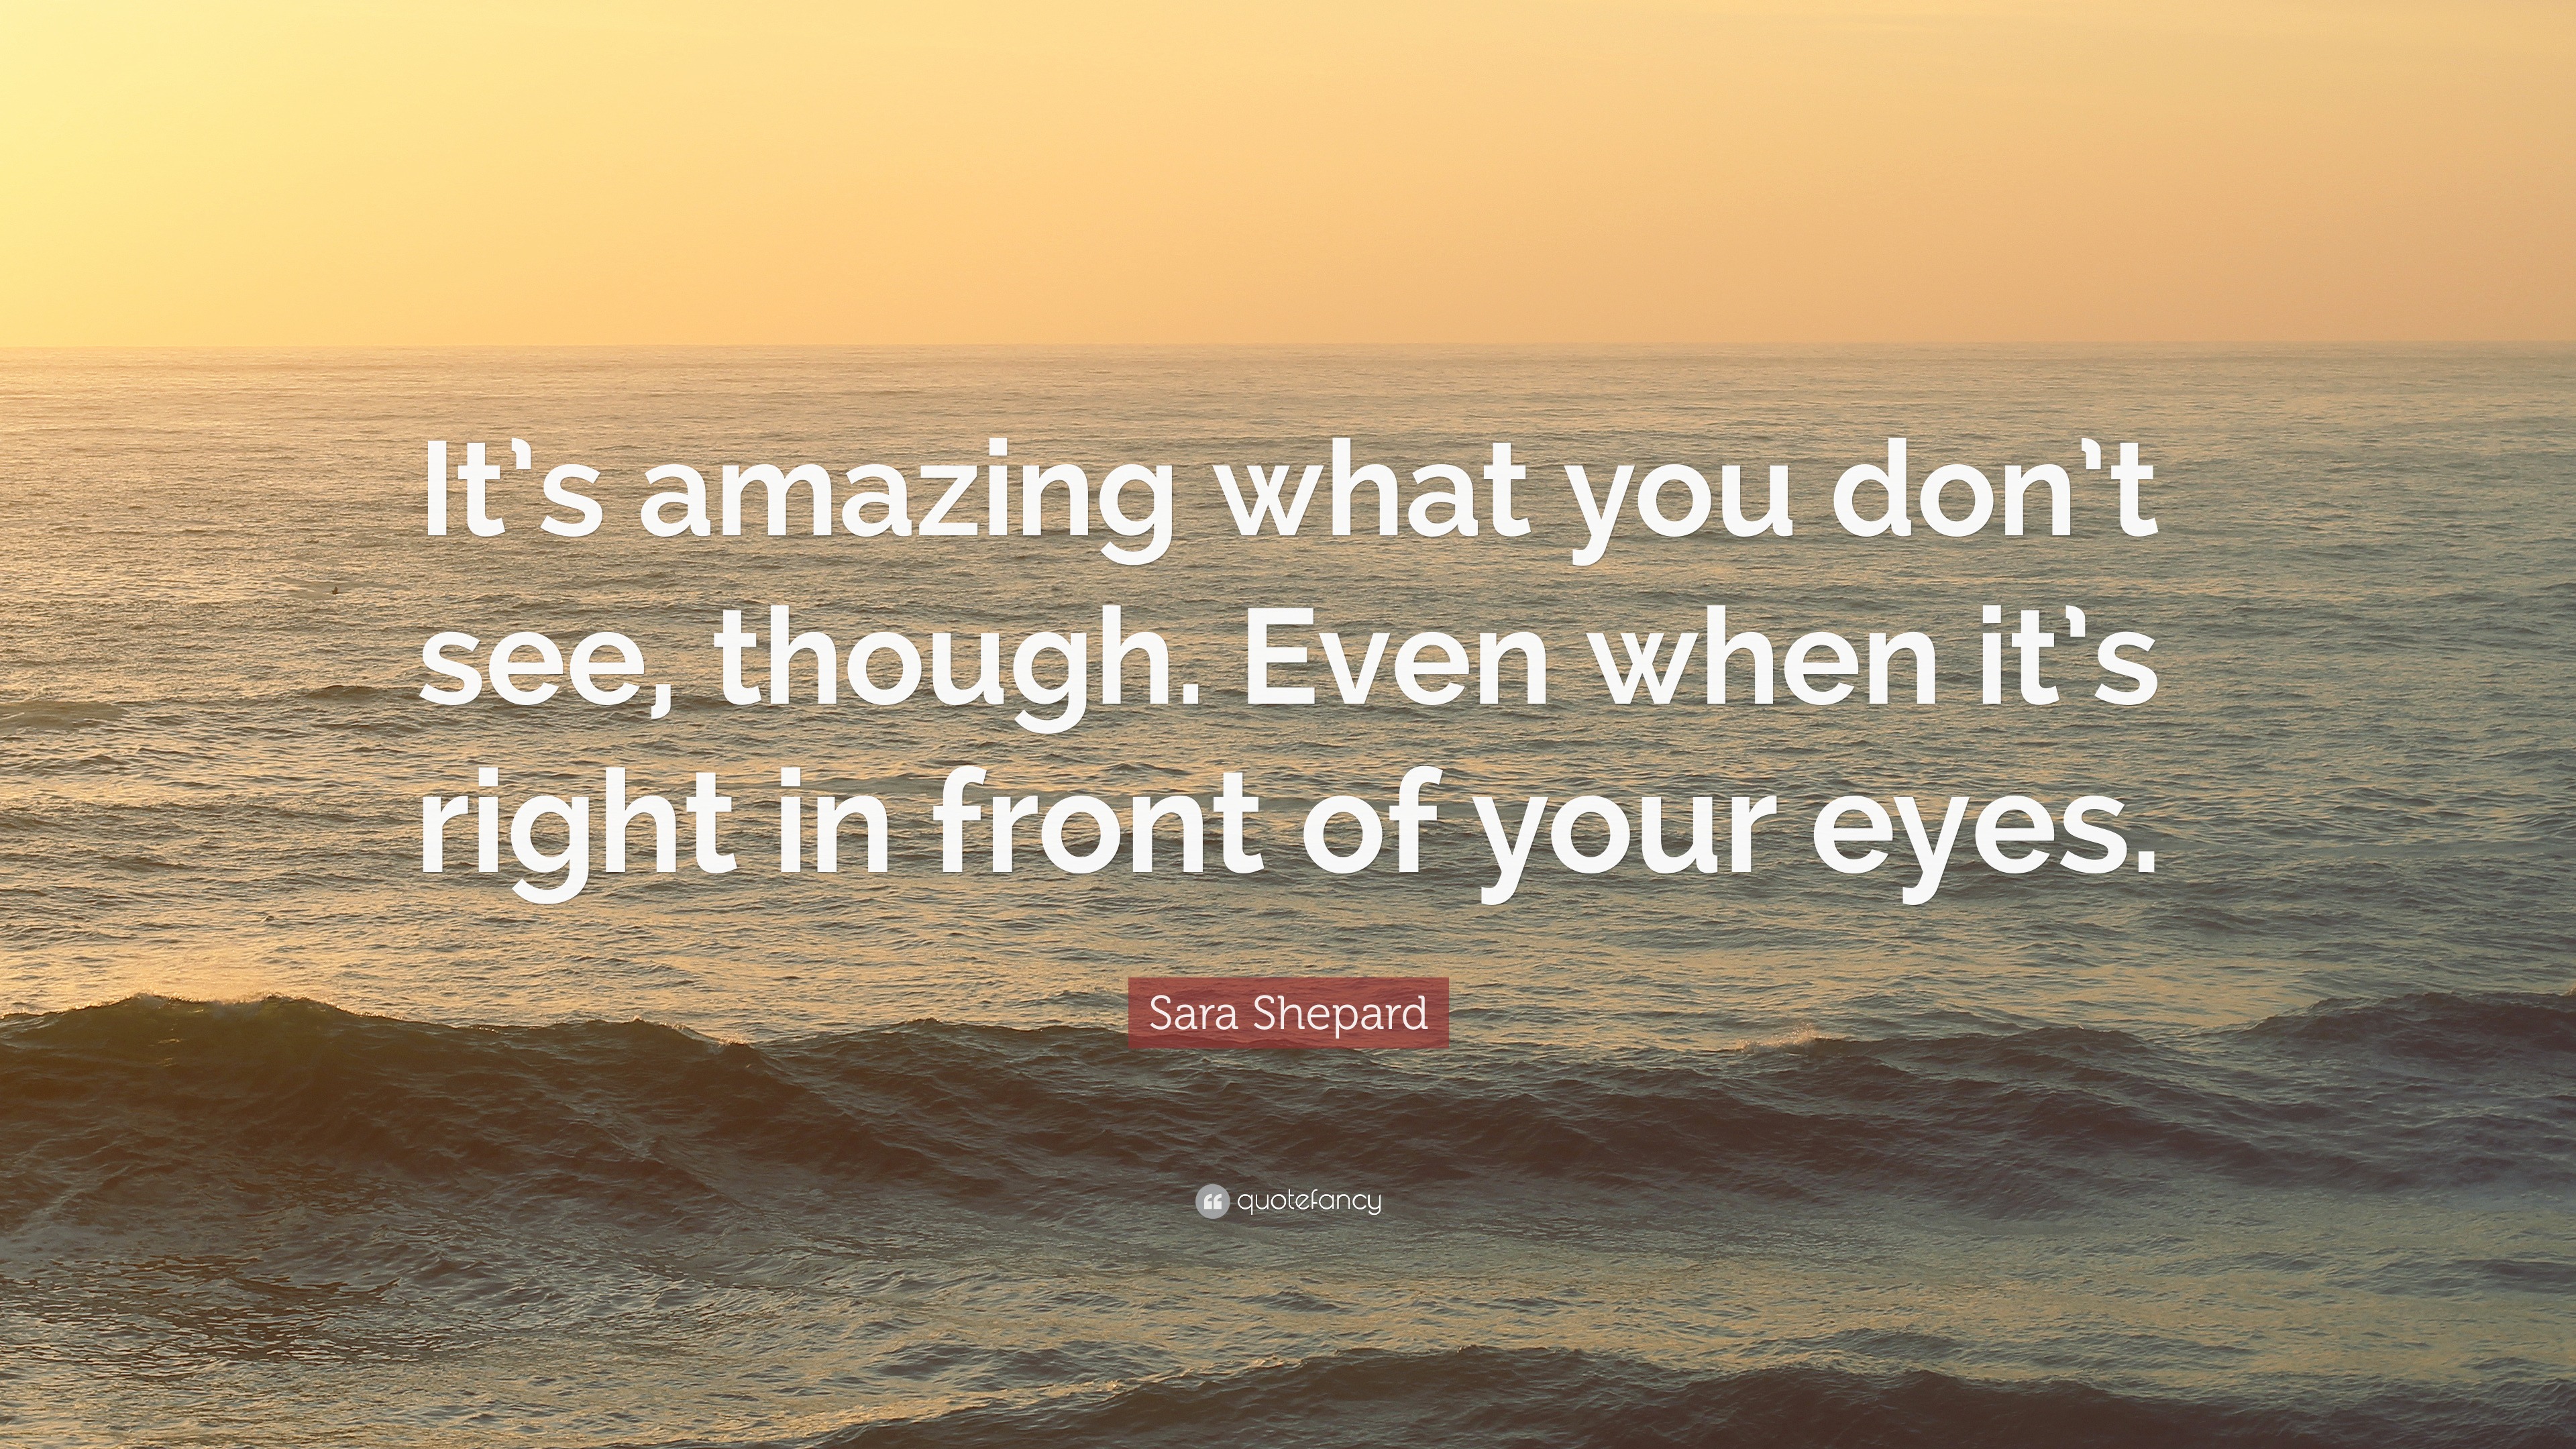 Sara Shepard Quote: “It's Amazing What You Don't See, Though. Even When It's Right In